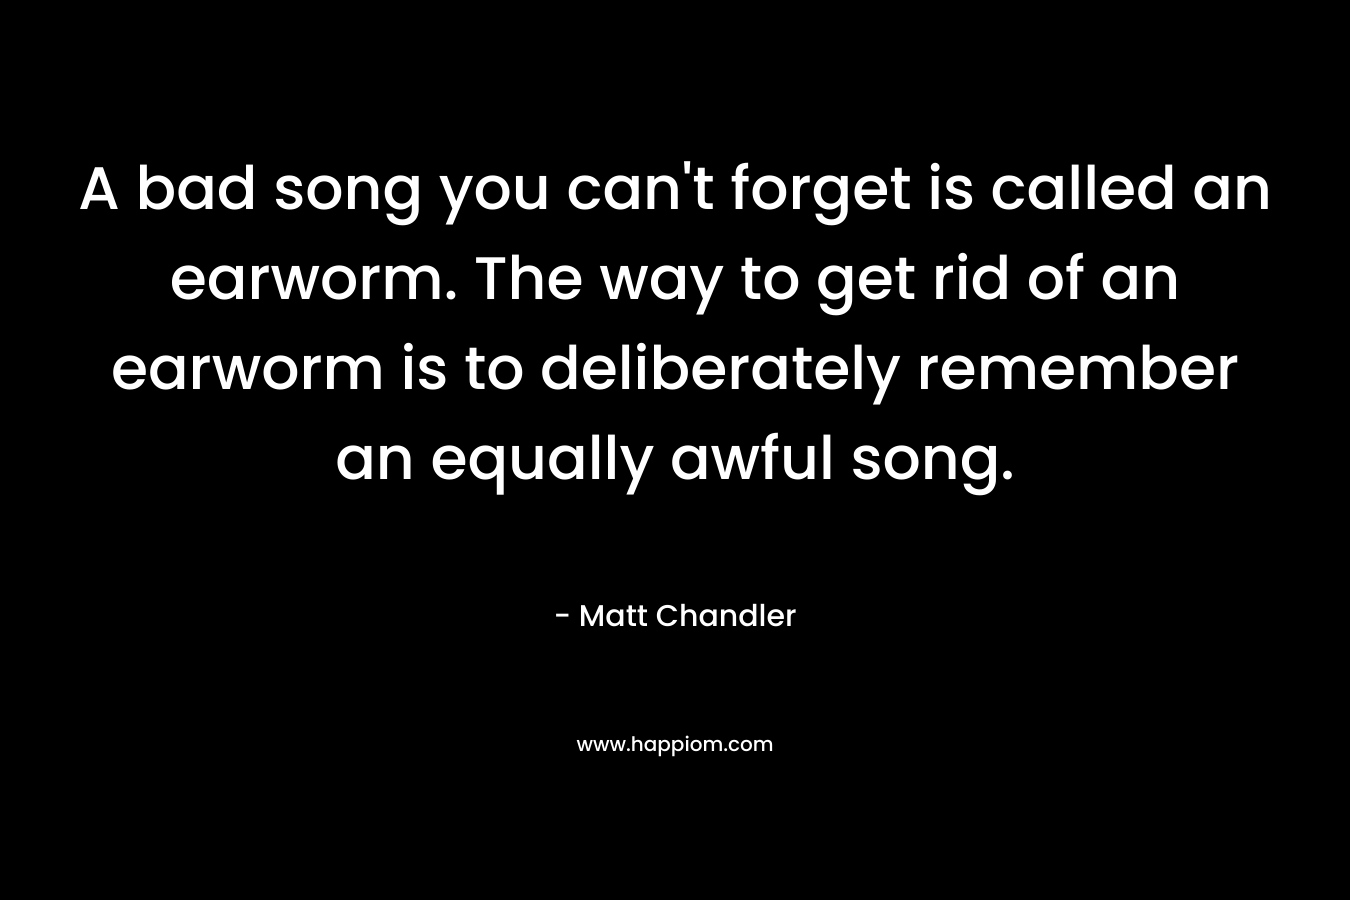 A bad song you can't forget is called an earworm. The way to get rid of an earworm is to deliberately remember an equally awful song.